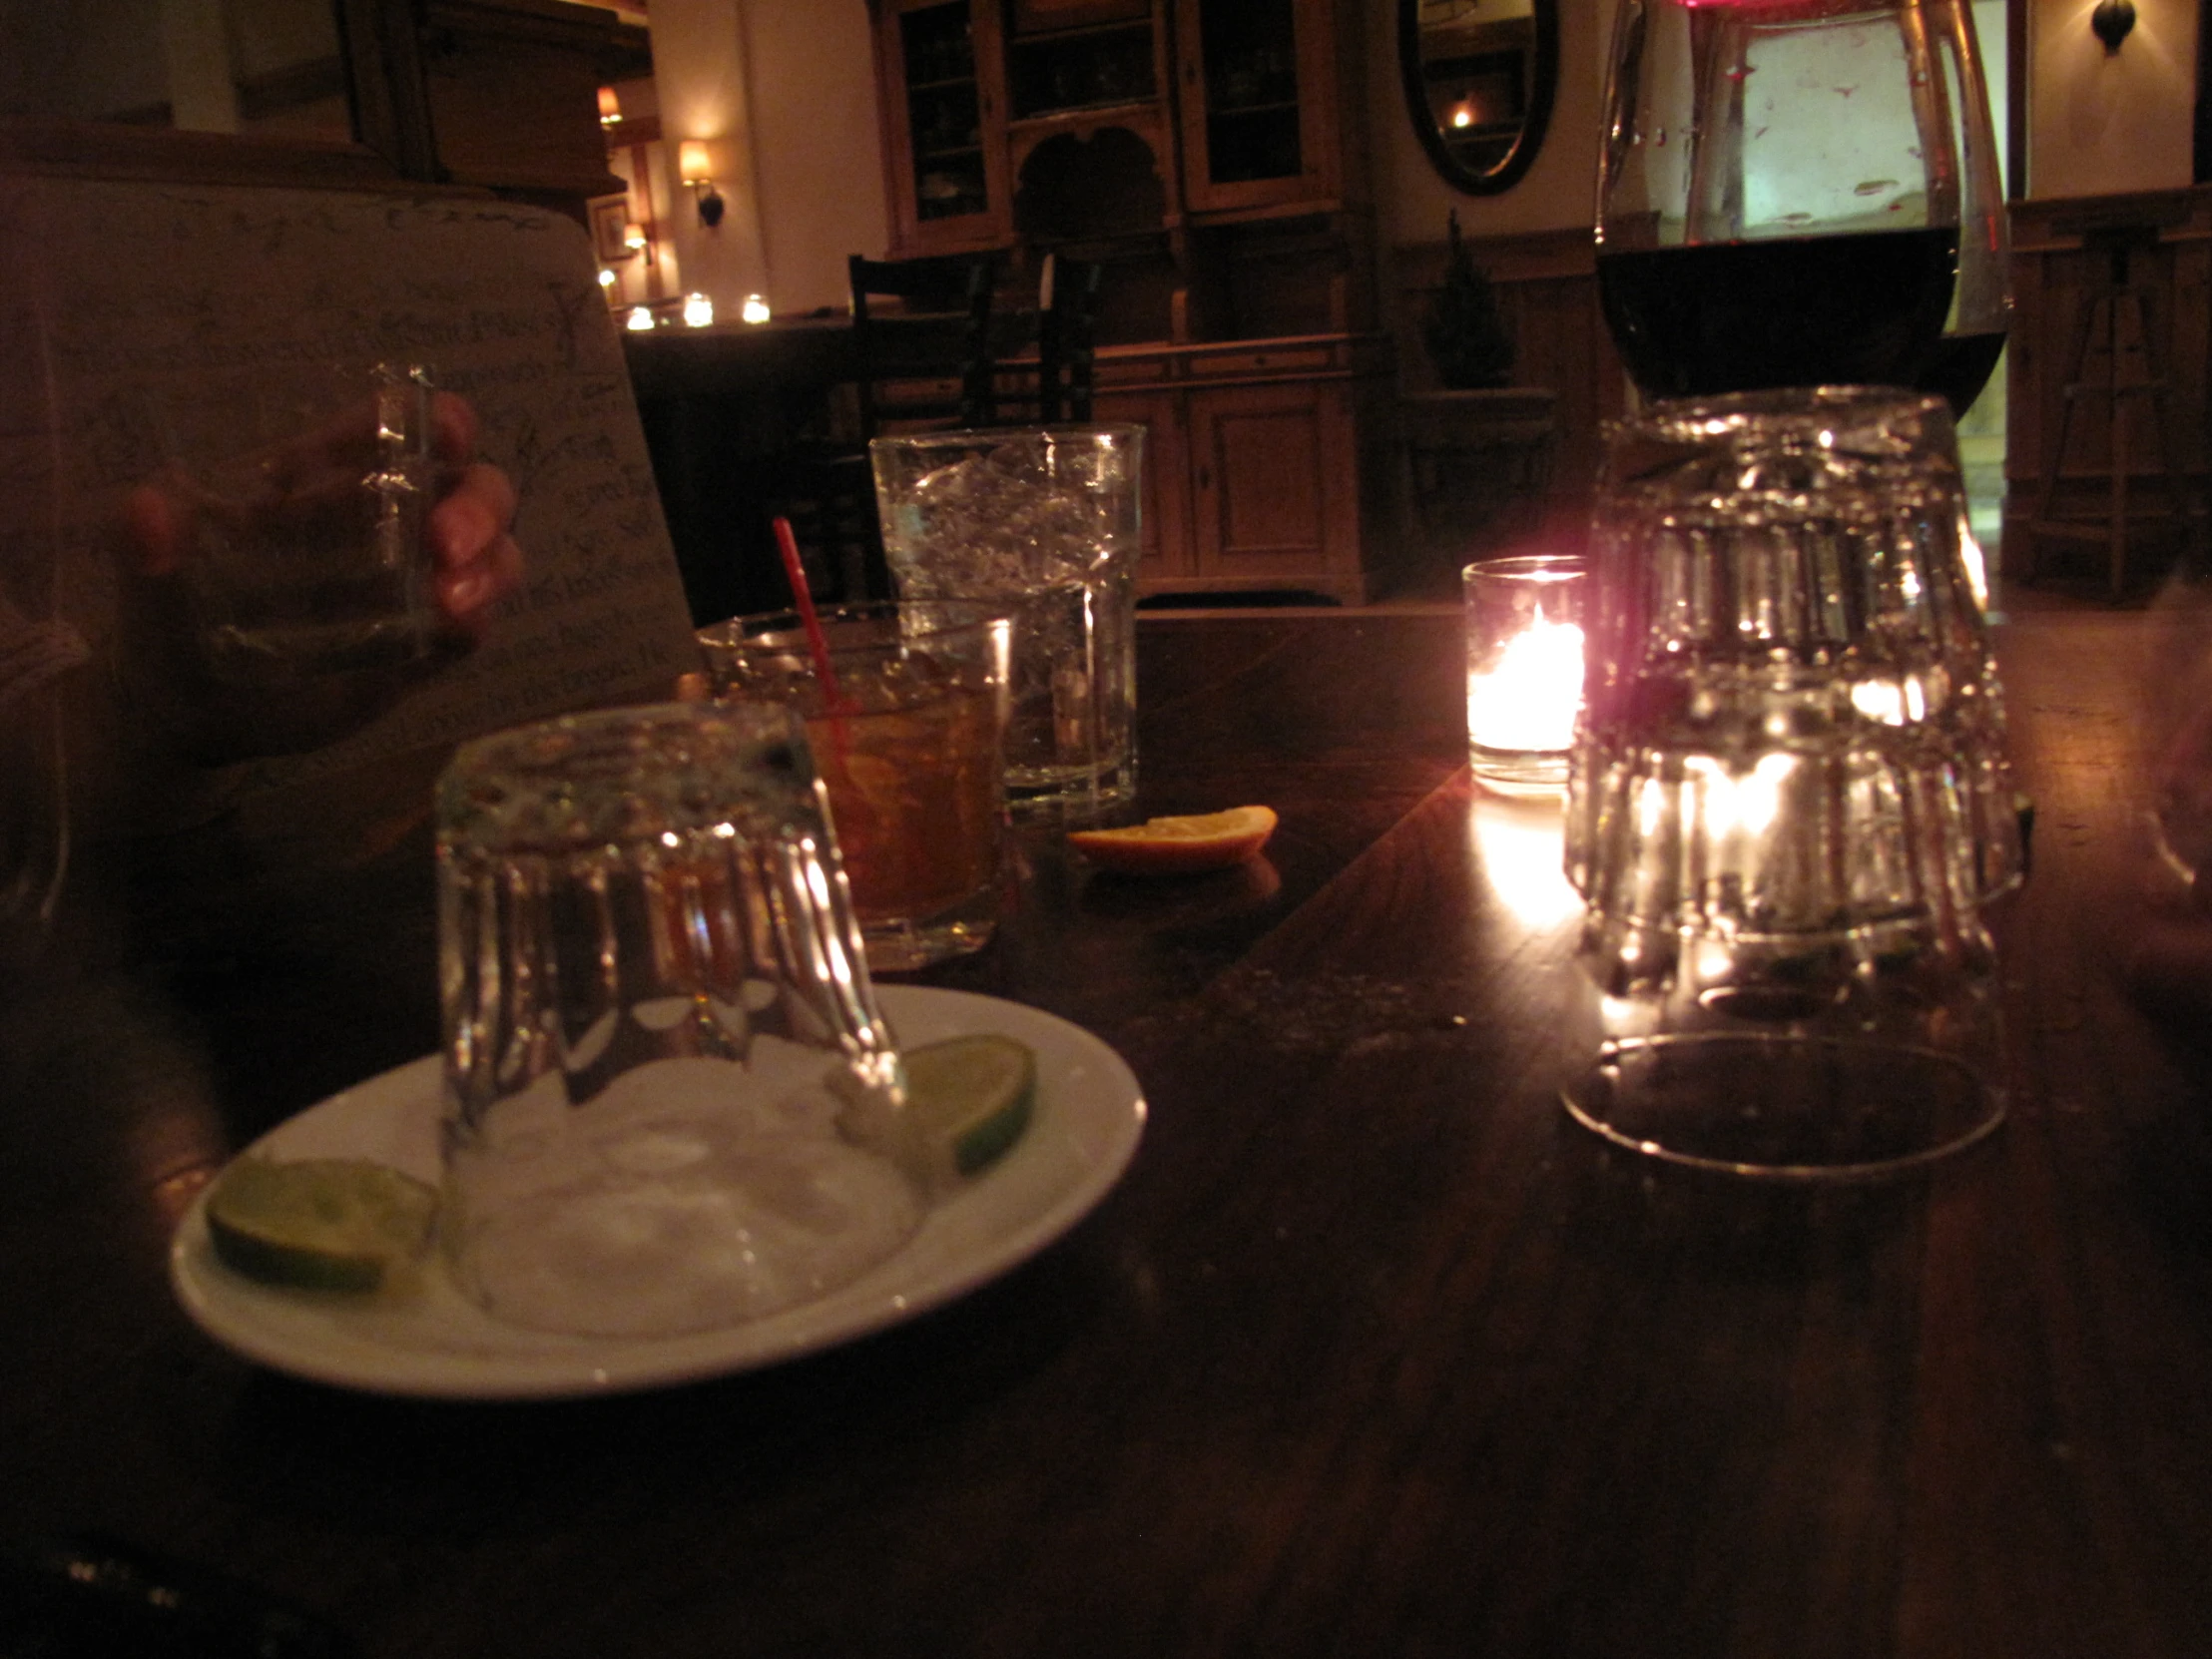 glasses on a table with candlelight inside a room